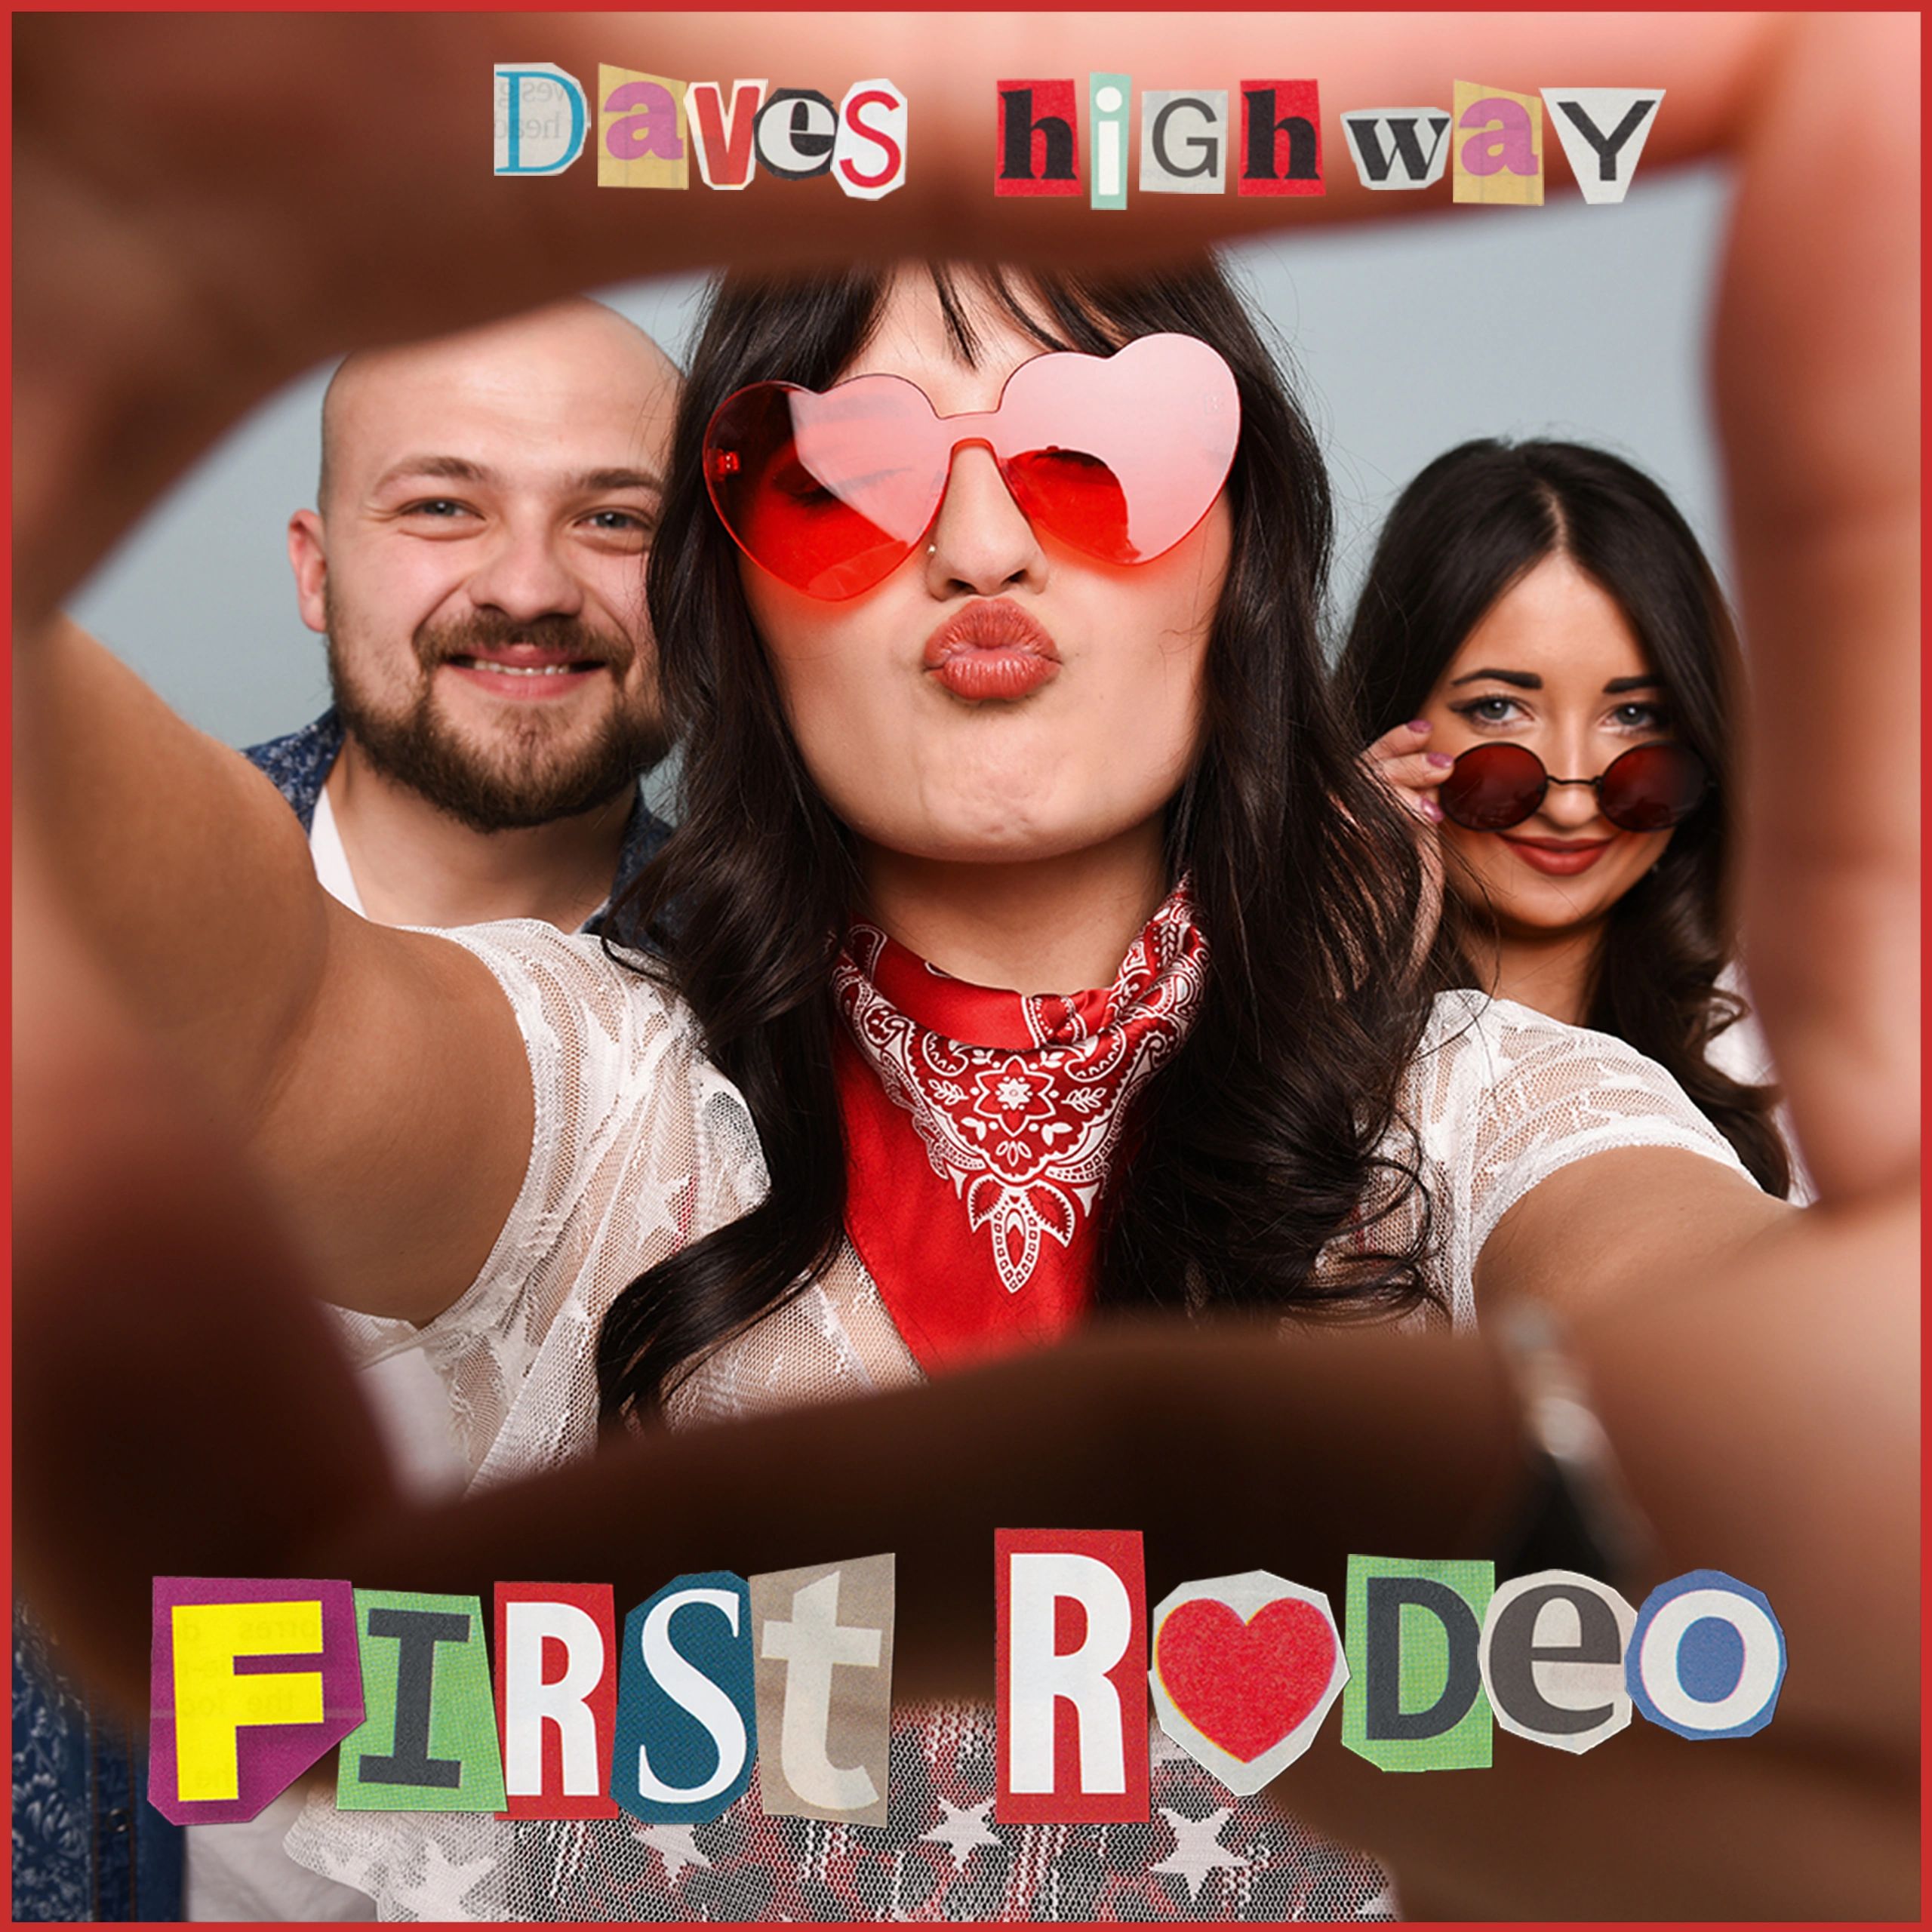 Daves Highway First Rodeo cover artwork